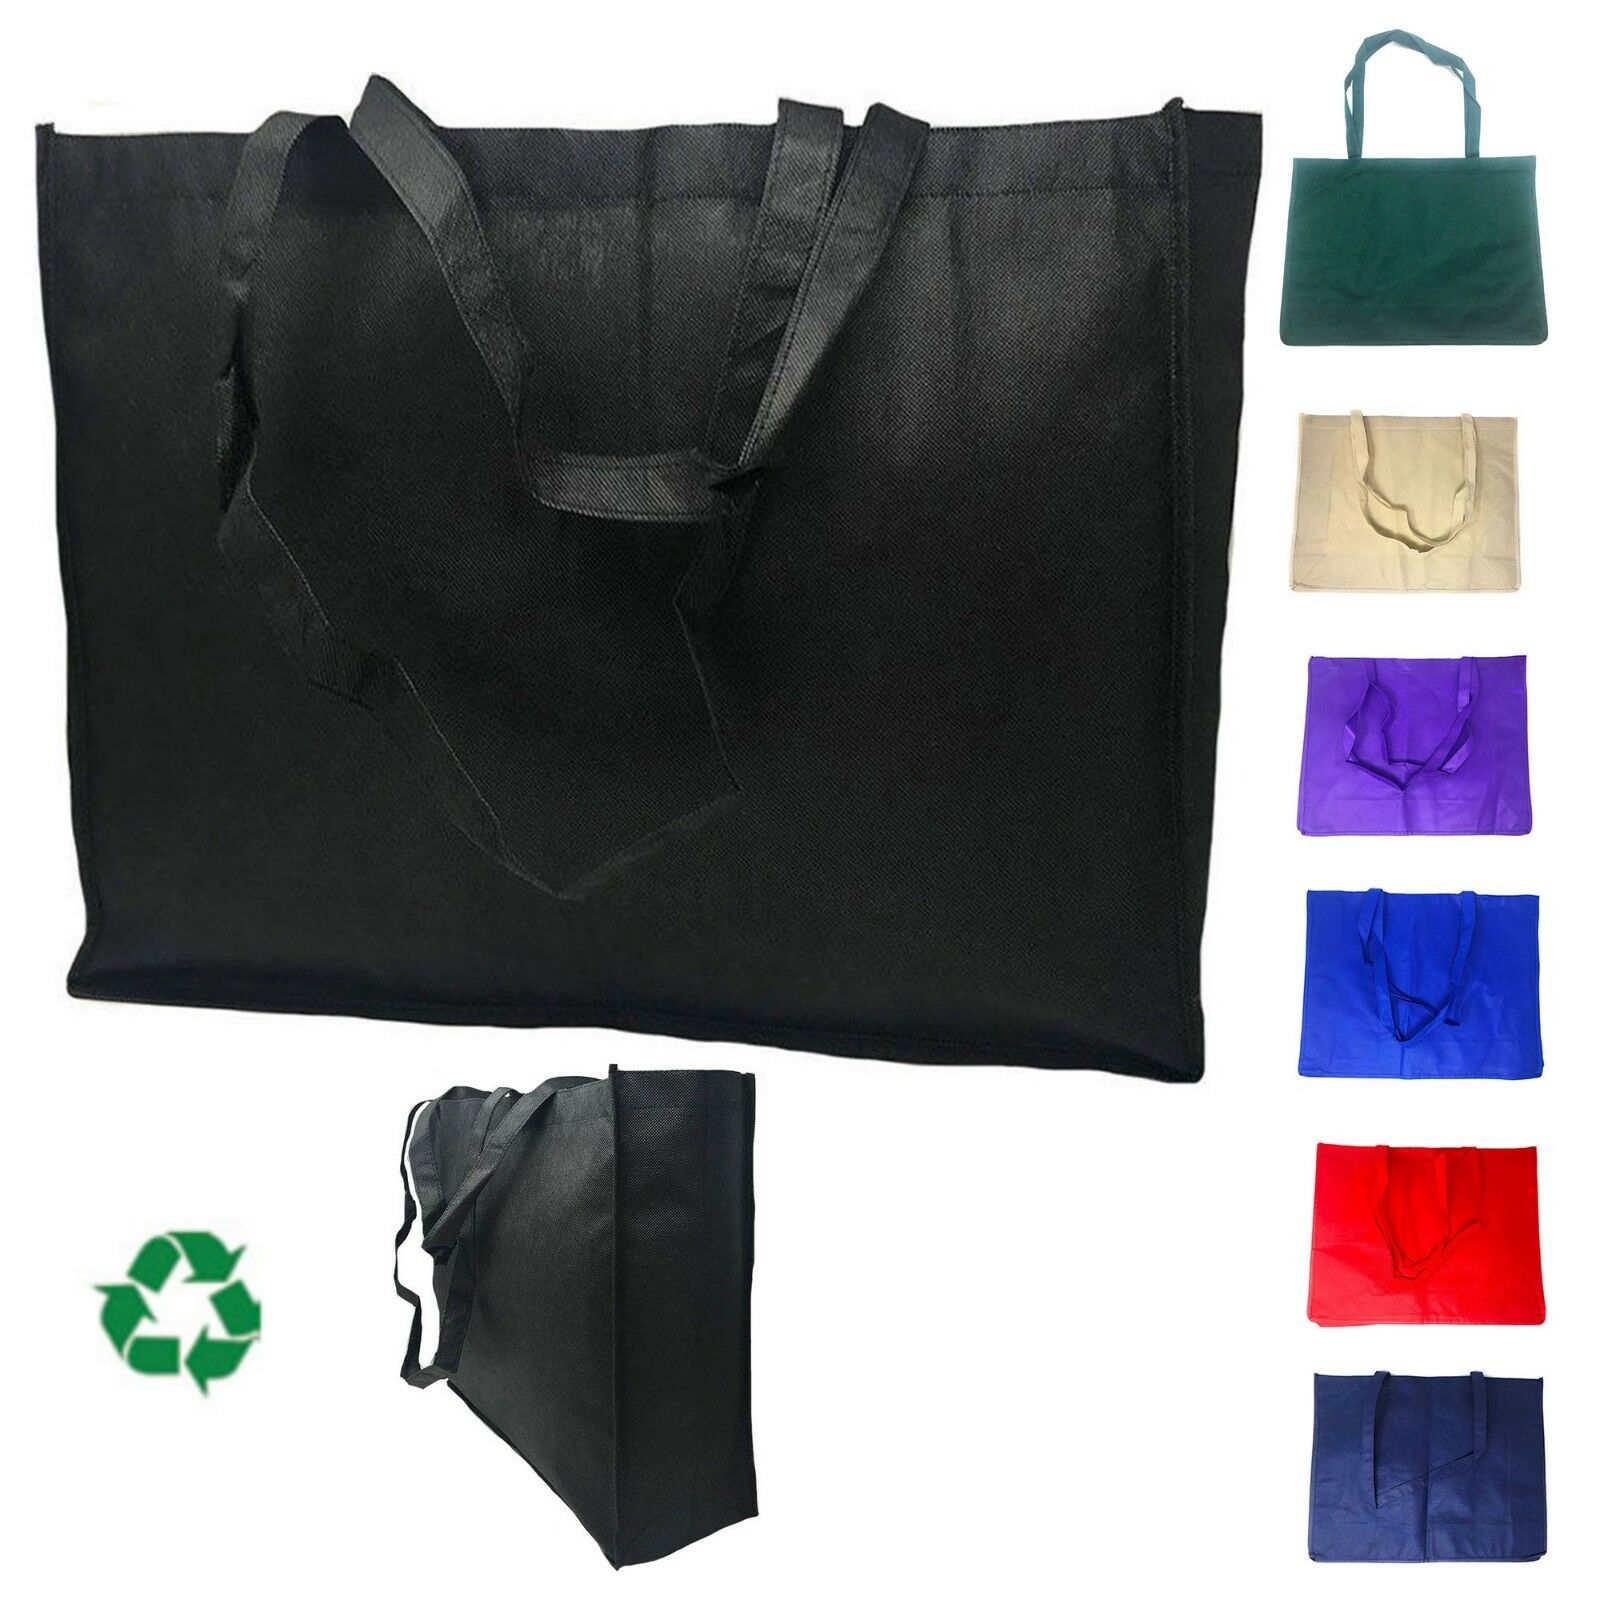 Extra Large Reusable Grocery Shopping Tote Bags Recycled Eco Friendly 20"